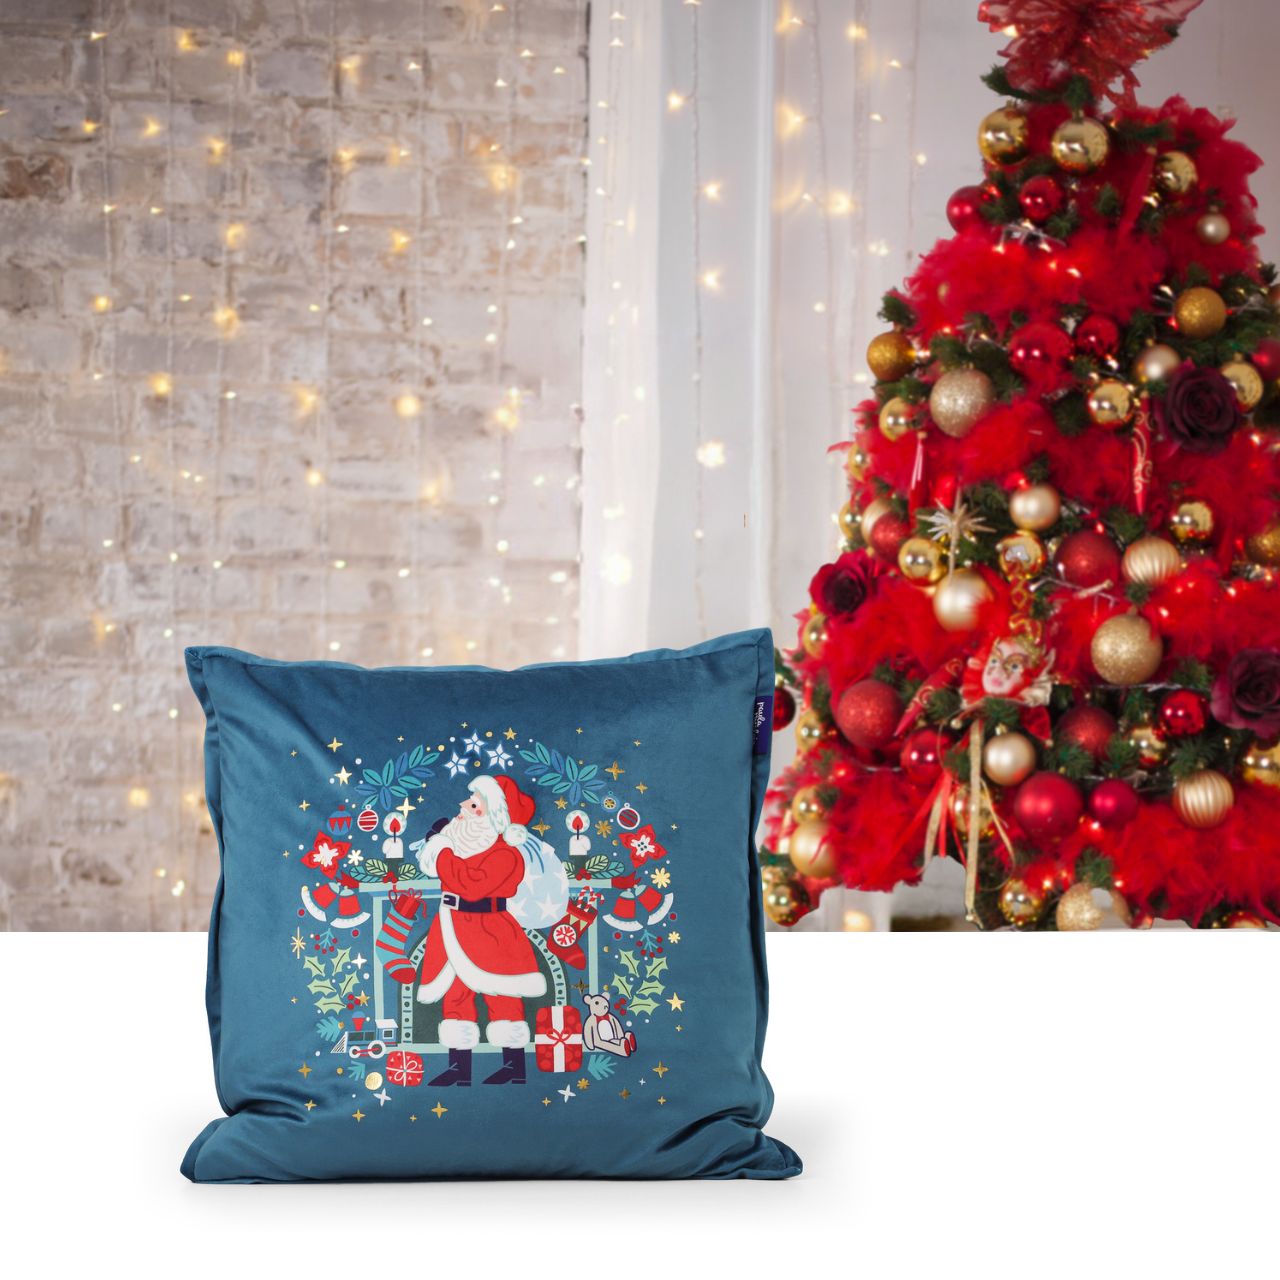 Christmas Cushion - Santa with Sack by Tipperary Crystal  Gather your loved ones for a holiday celebration to remember. We just Love Christmas! The festive season, the giving of gifts, creating memories and being together with family and loved ones. Have lots of fun with our lovingly designed and created Christmas decorations, each one has a magic sparkle of elf dust!